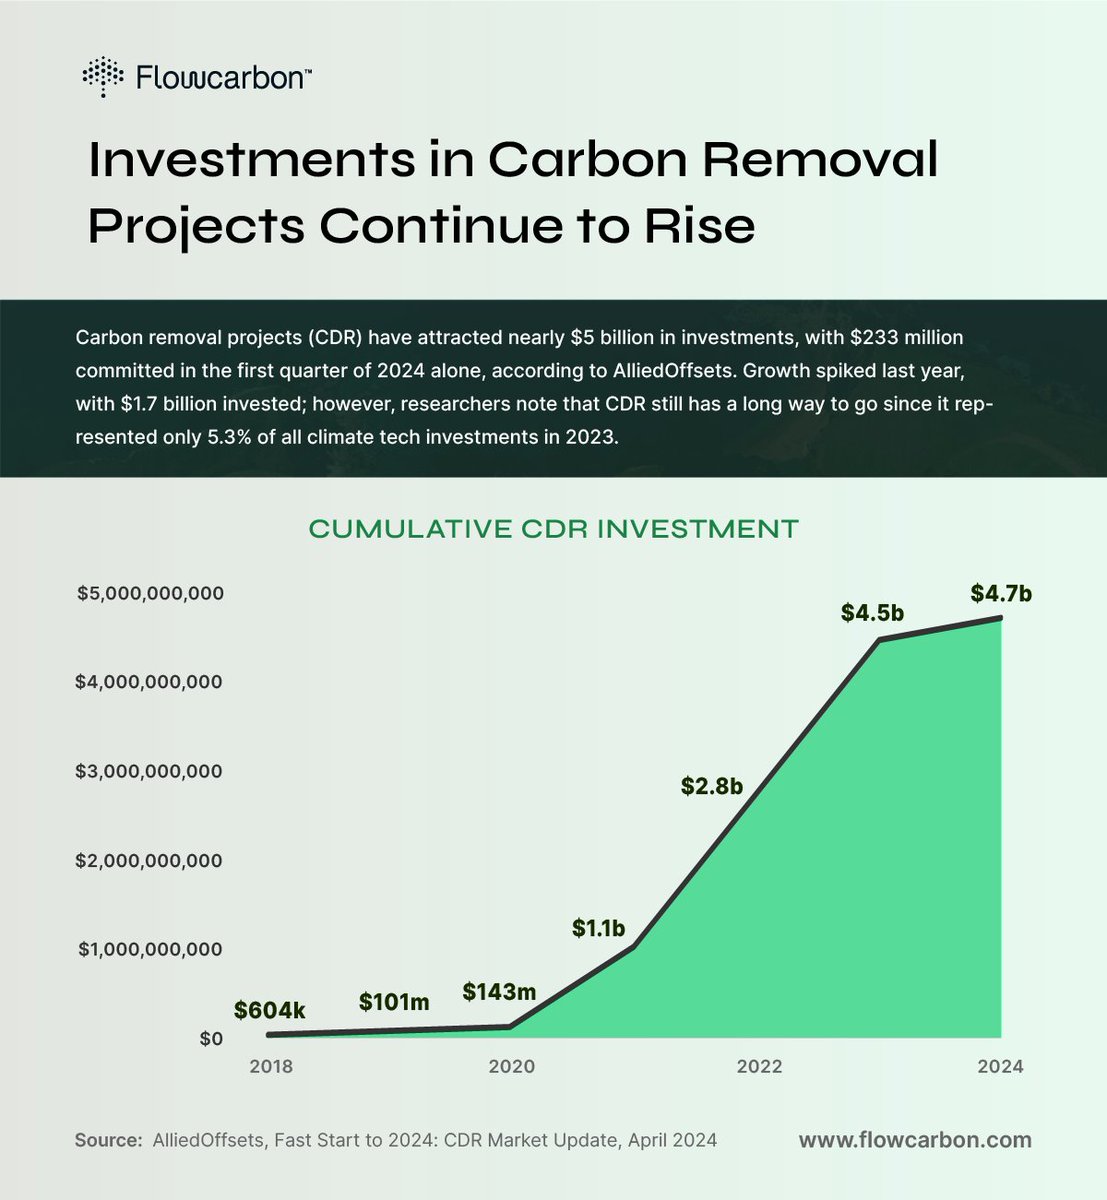 Carbon removal projects (#CDR) have attracted nearly $5 billion in investments, with $233 million committed in the first quarter of 2024 alone, according to Allied Offsets. #ClimateAction #SustainableFinance #CarbonRemoval #InnovationInSustainability #NetZero #carbonfinance